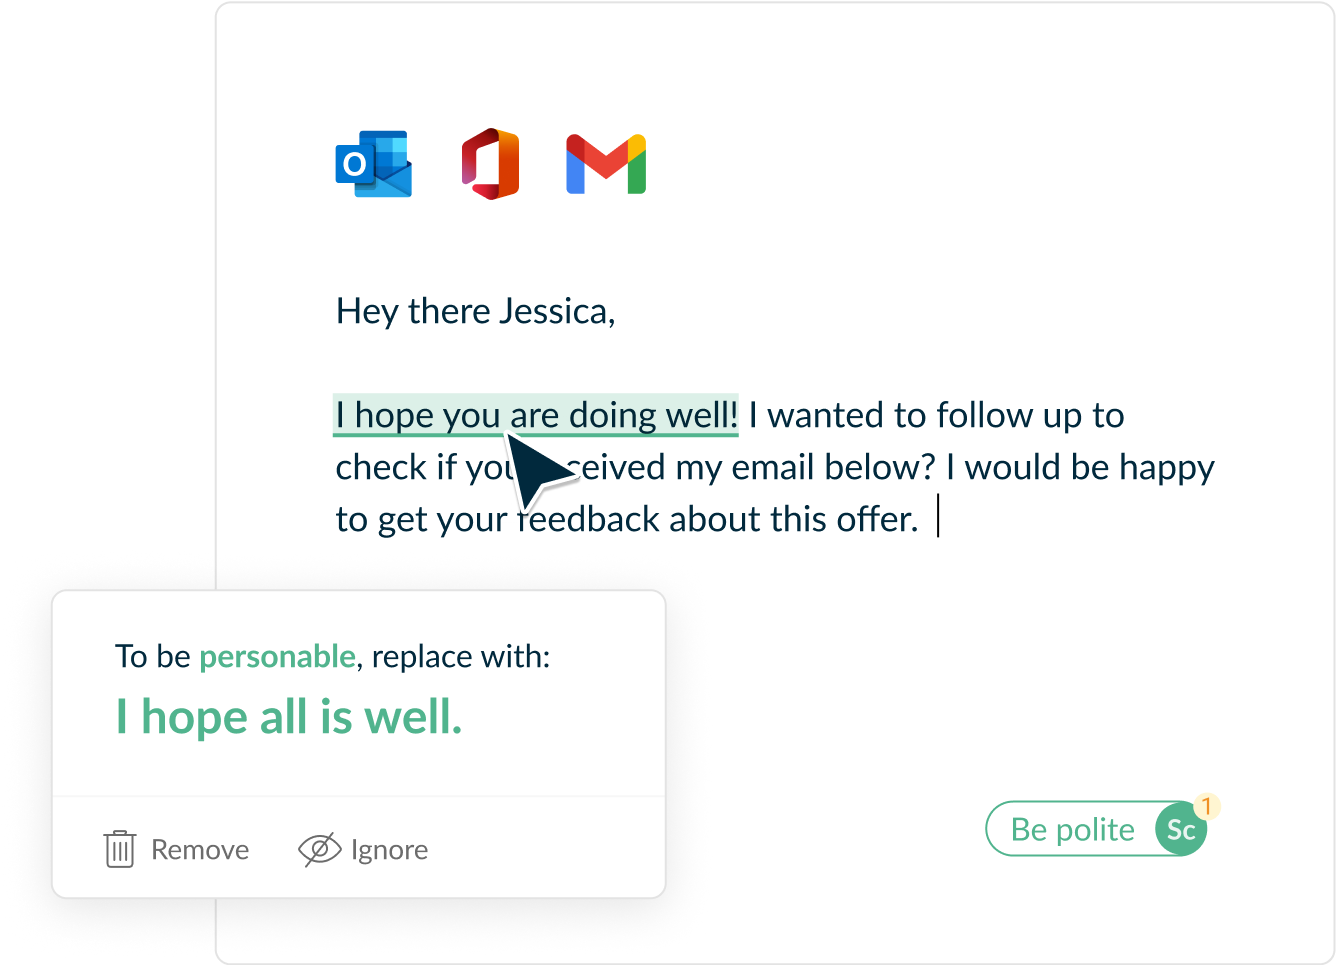 Personalize Emails_2